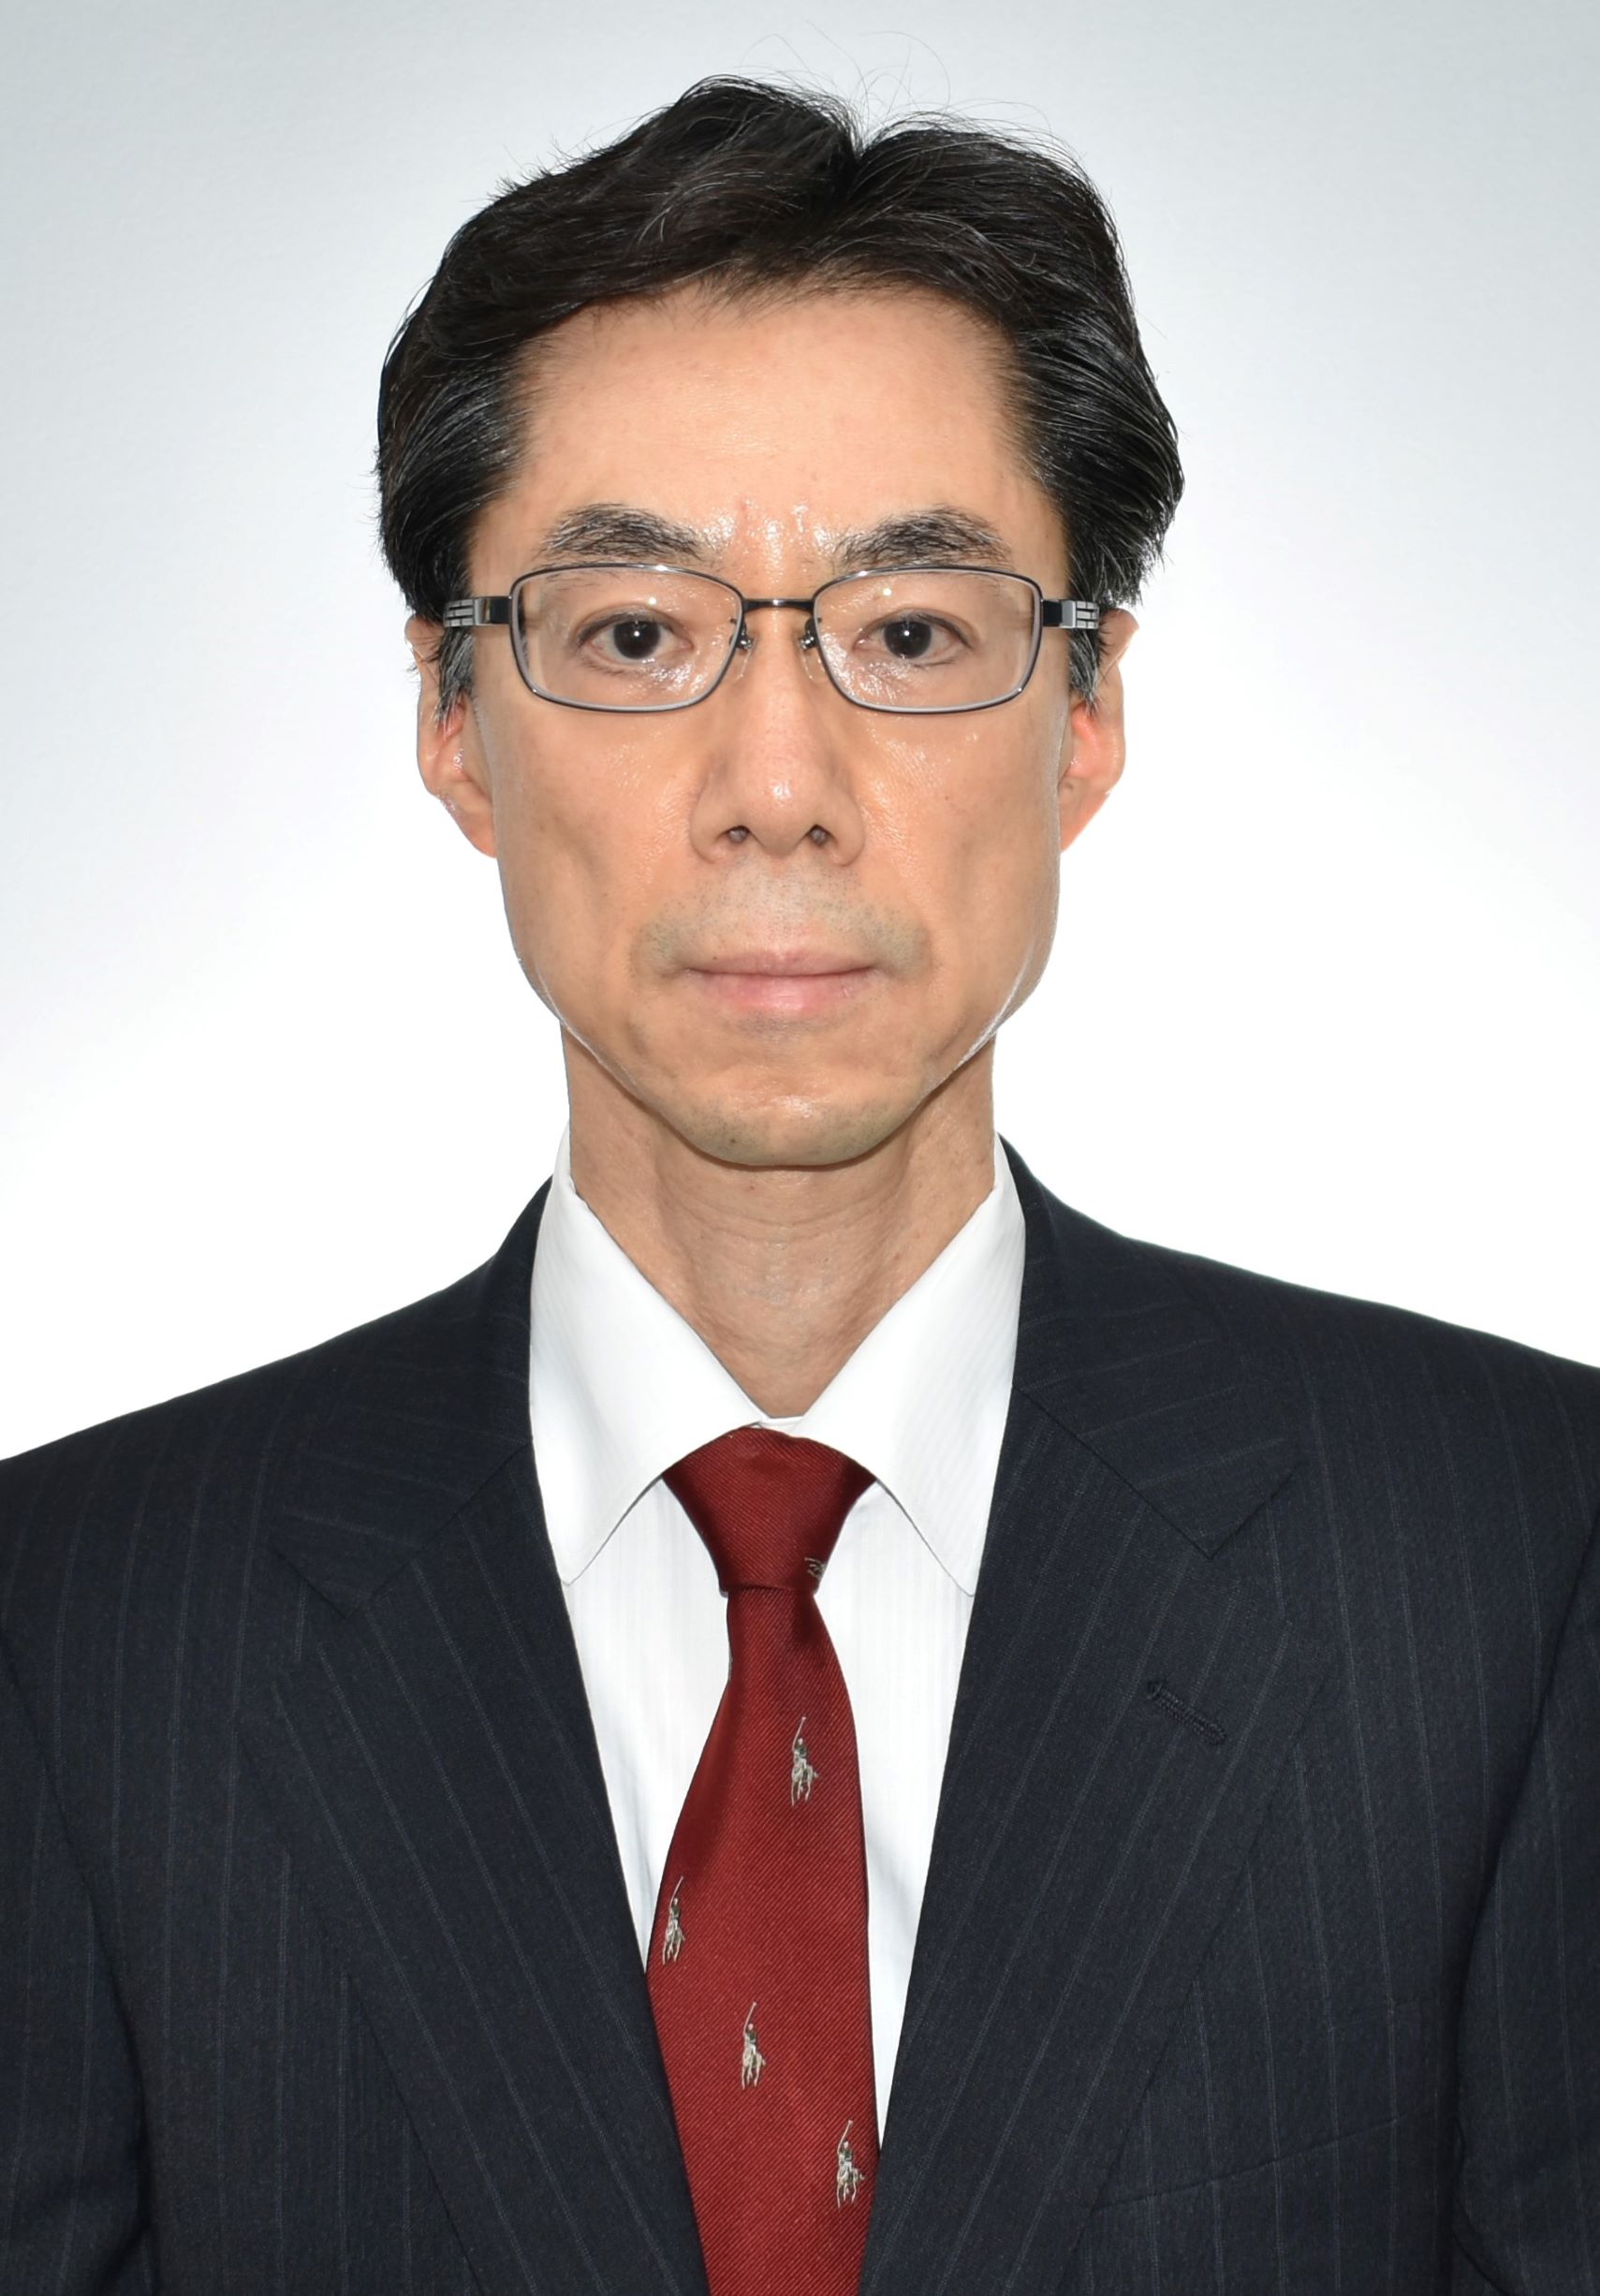 Professor Hirofumi Sakai of Institute for Photon Science and Technology/Department of Physics Receives Awards ‘The Commendation for Science and Technology by the Minister of Education, Culture, Sports, Science, and Technology’